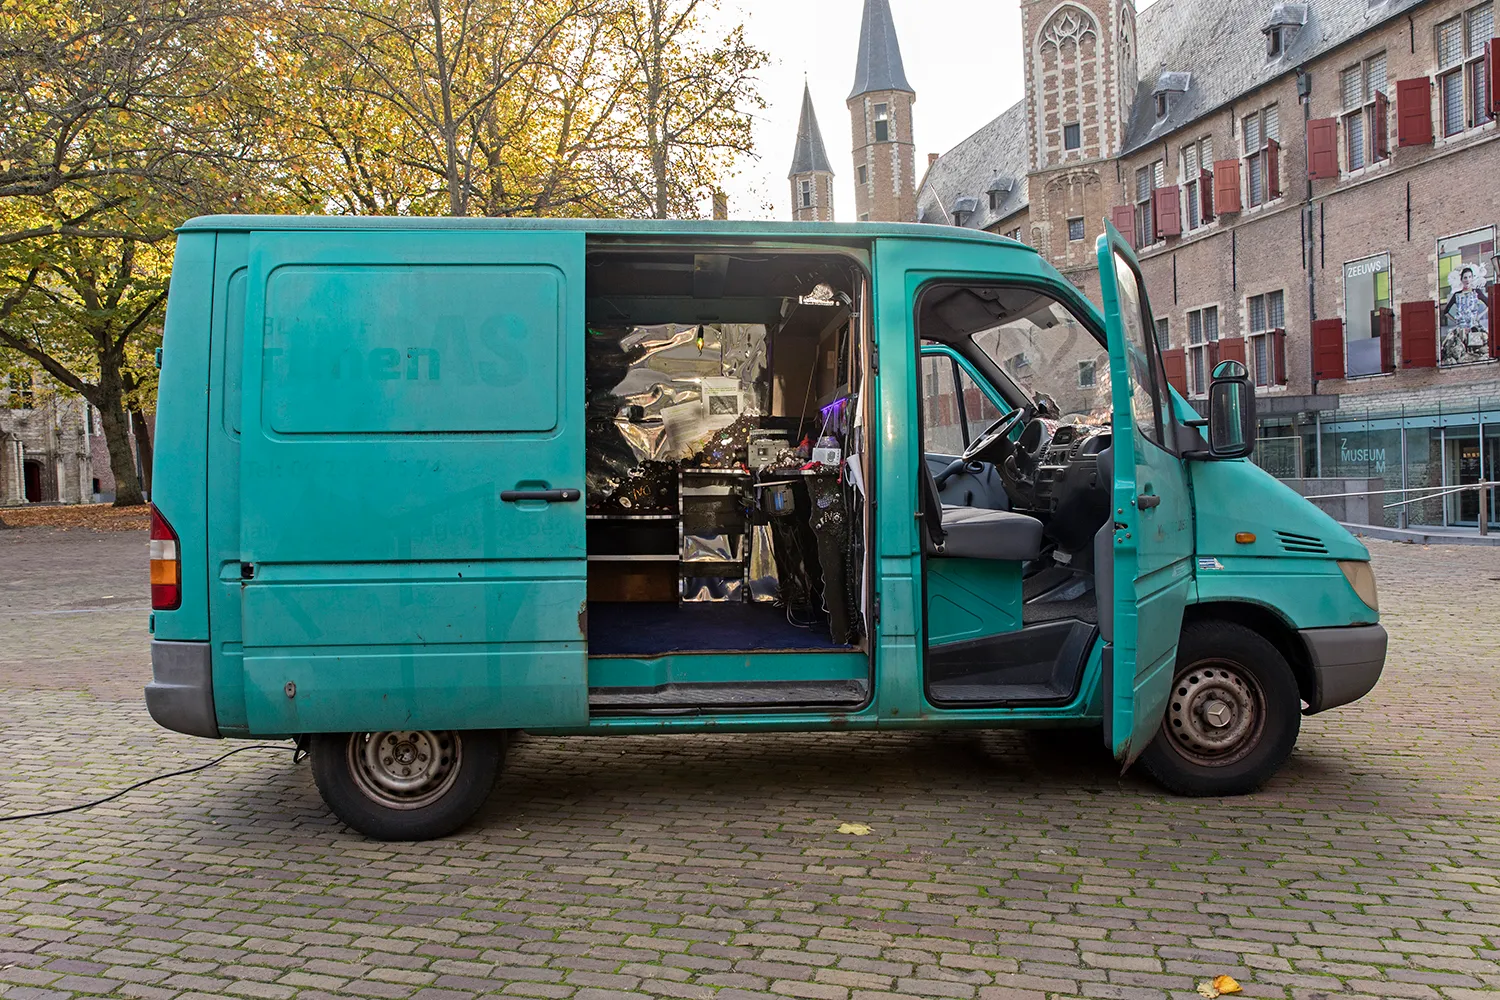 Turquoise van with doors open, parked in the middle of a square in Middelburg